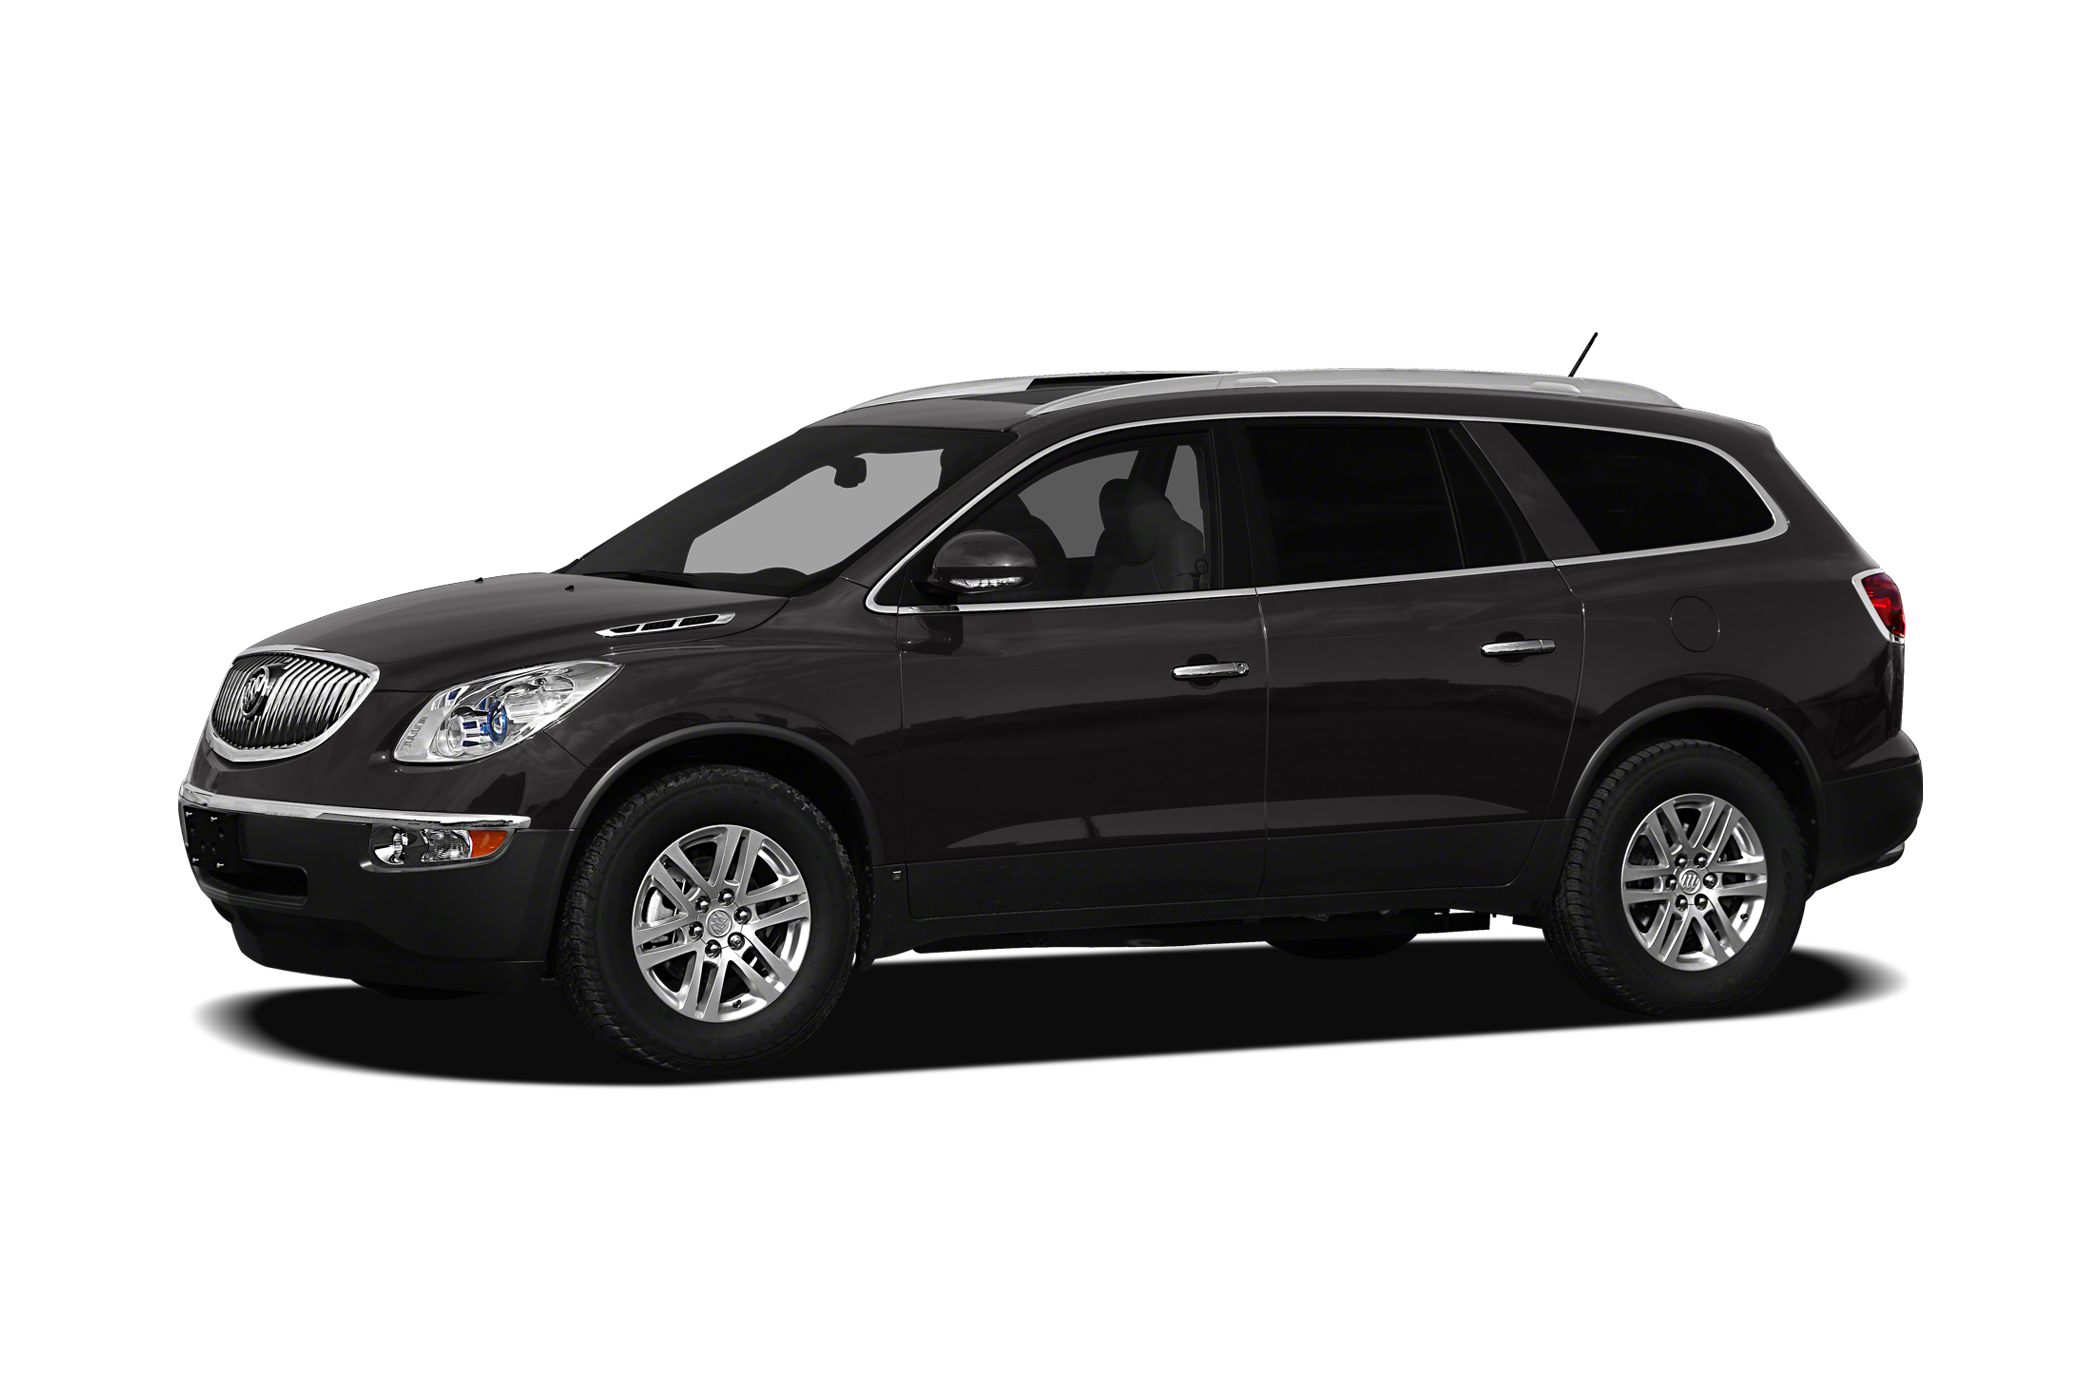 2012 buick enclave accelerate and decelerate